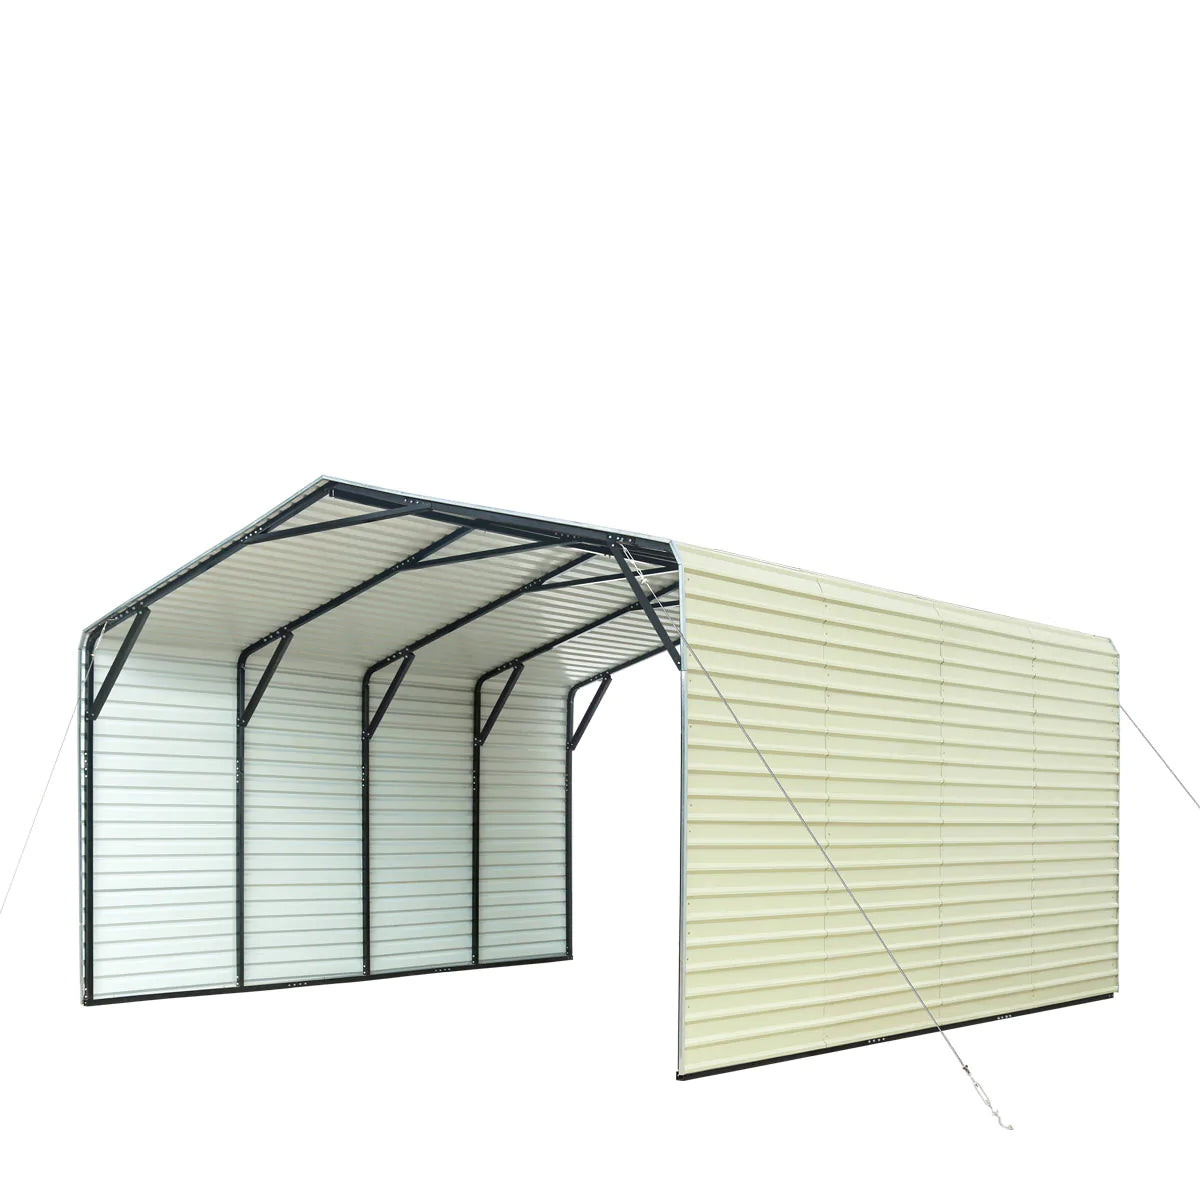 New 20' x 20' All-Steel Carport Shed With 10' High Enclosed Sidewalls